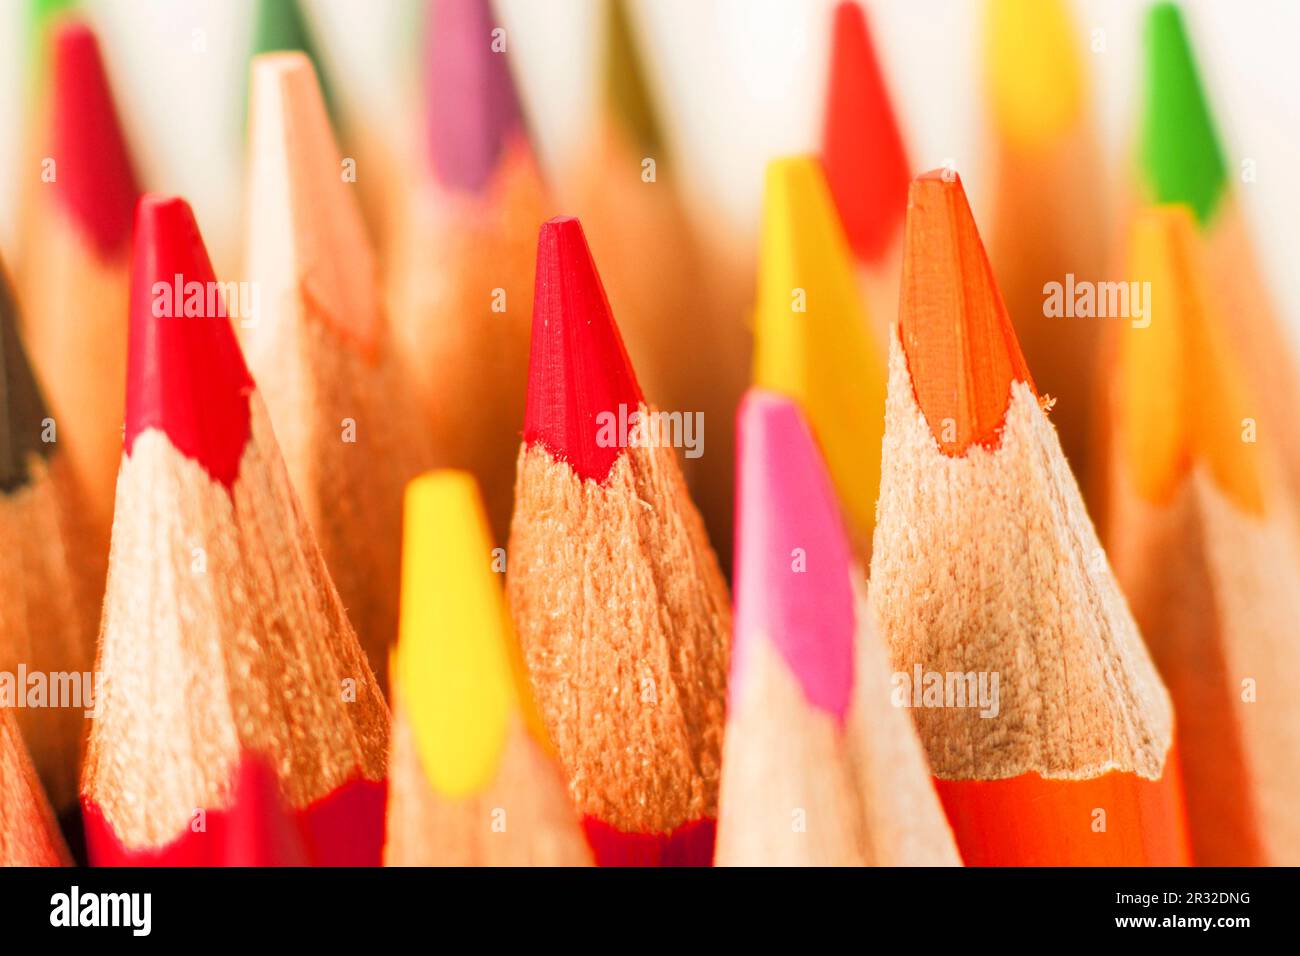 multiple colored pencils grouped together, balearic islands spain. Stock Photo